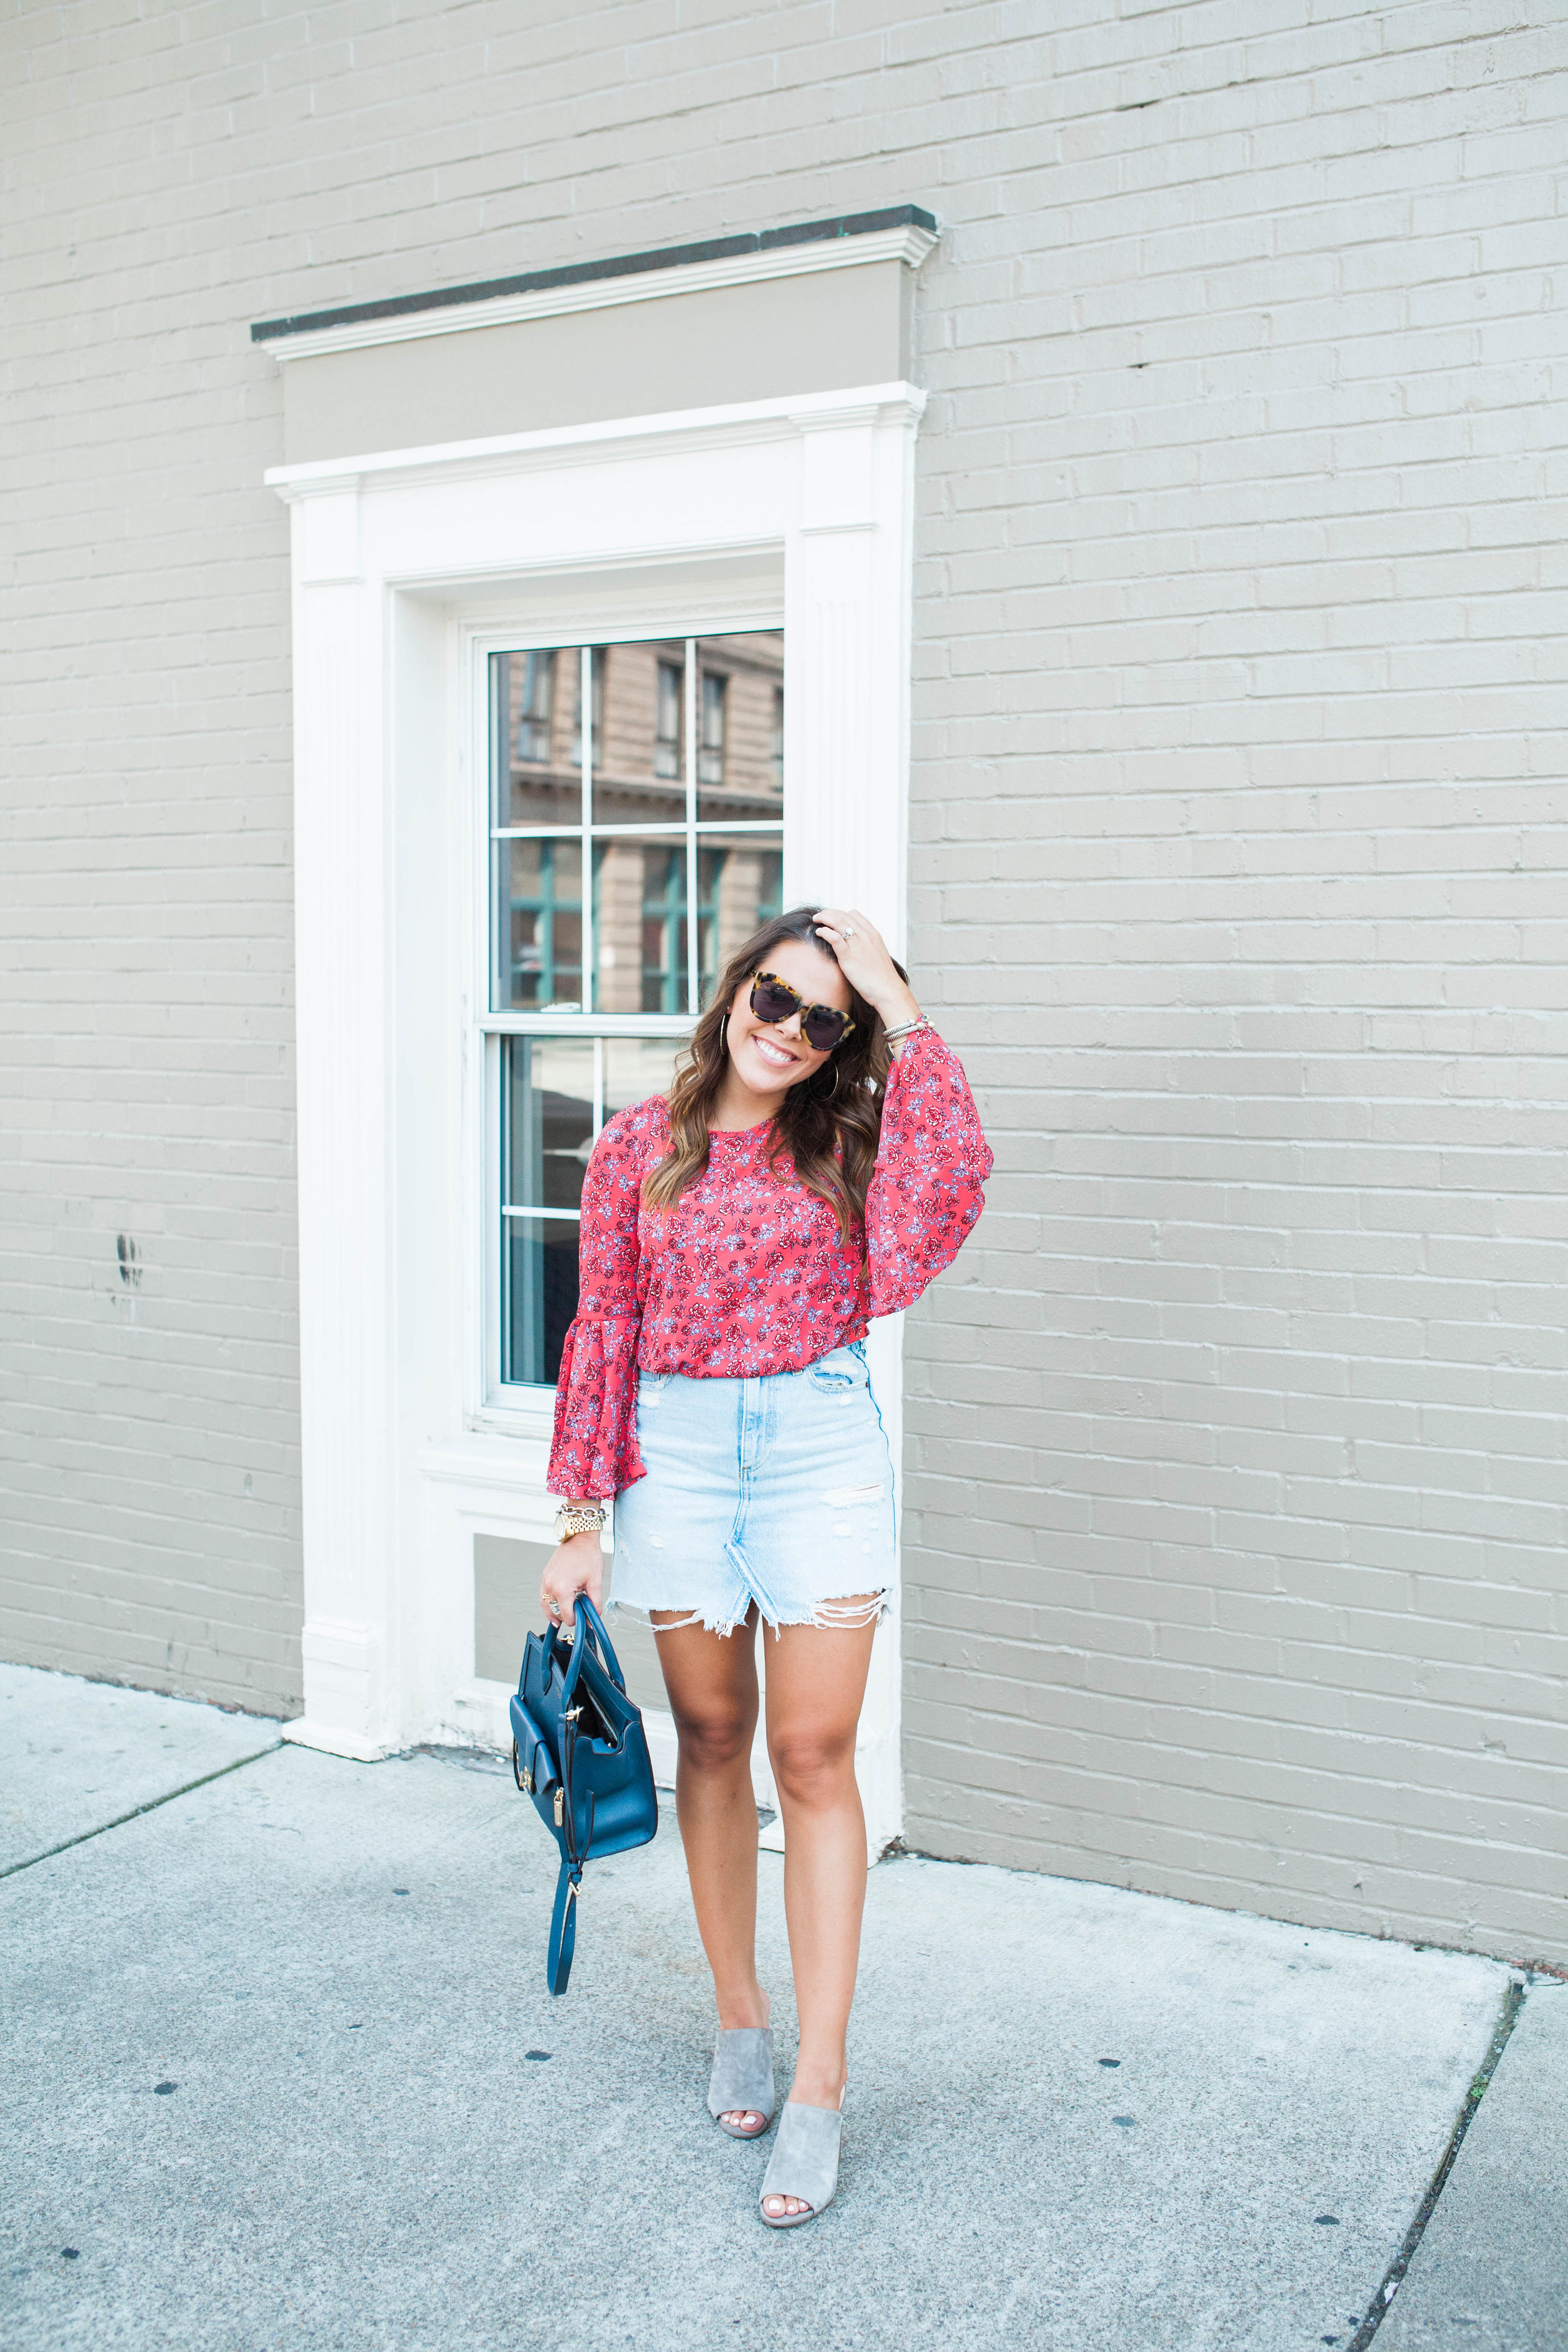 How to wear a denim skirt for fall